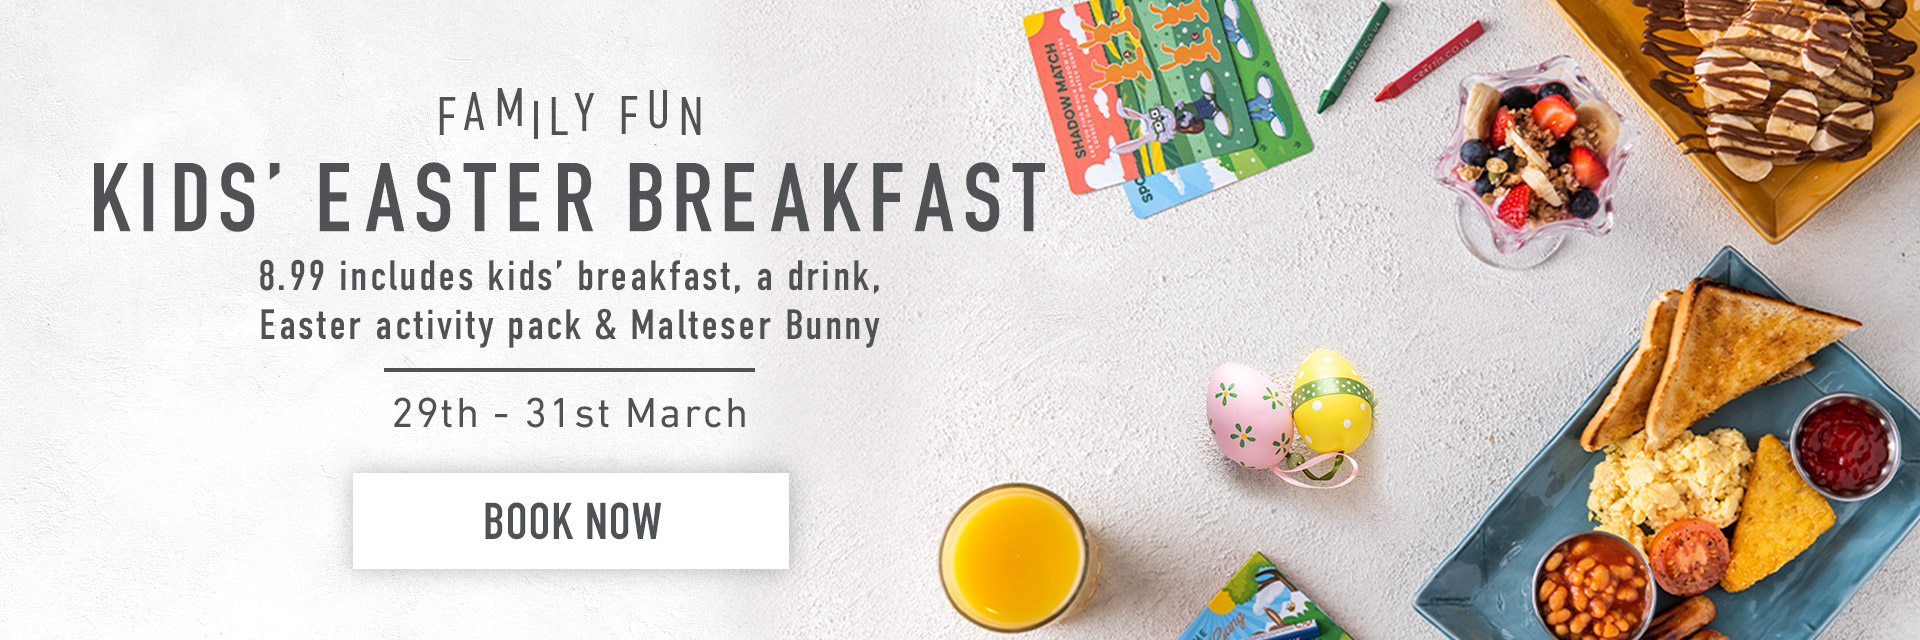 Kids Easter Breakfast at The Larkswood Harvester in Chingford